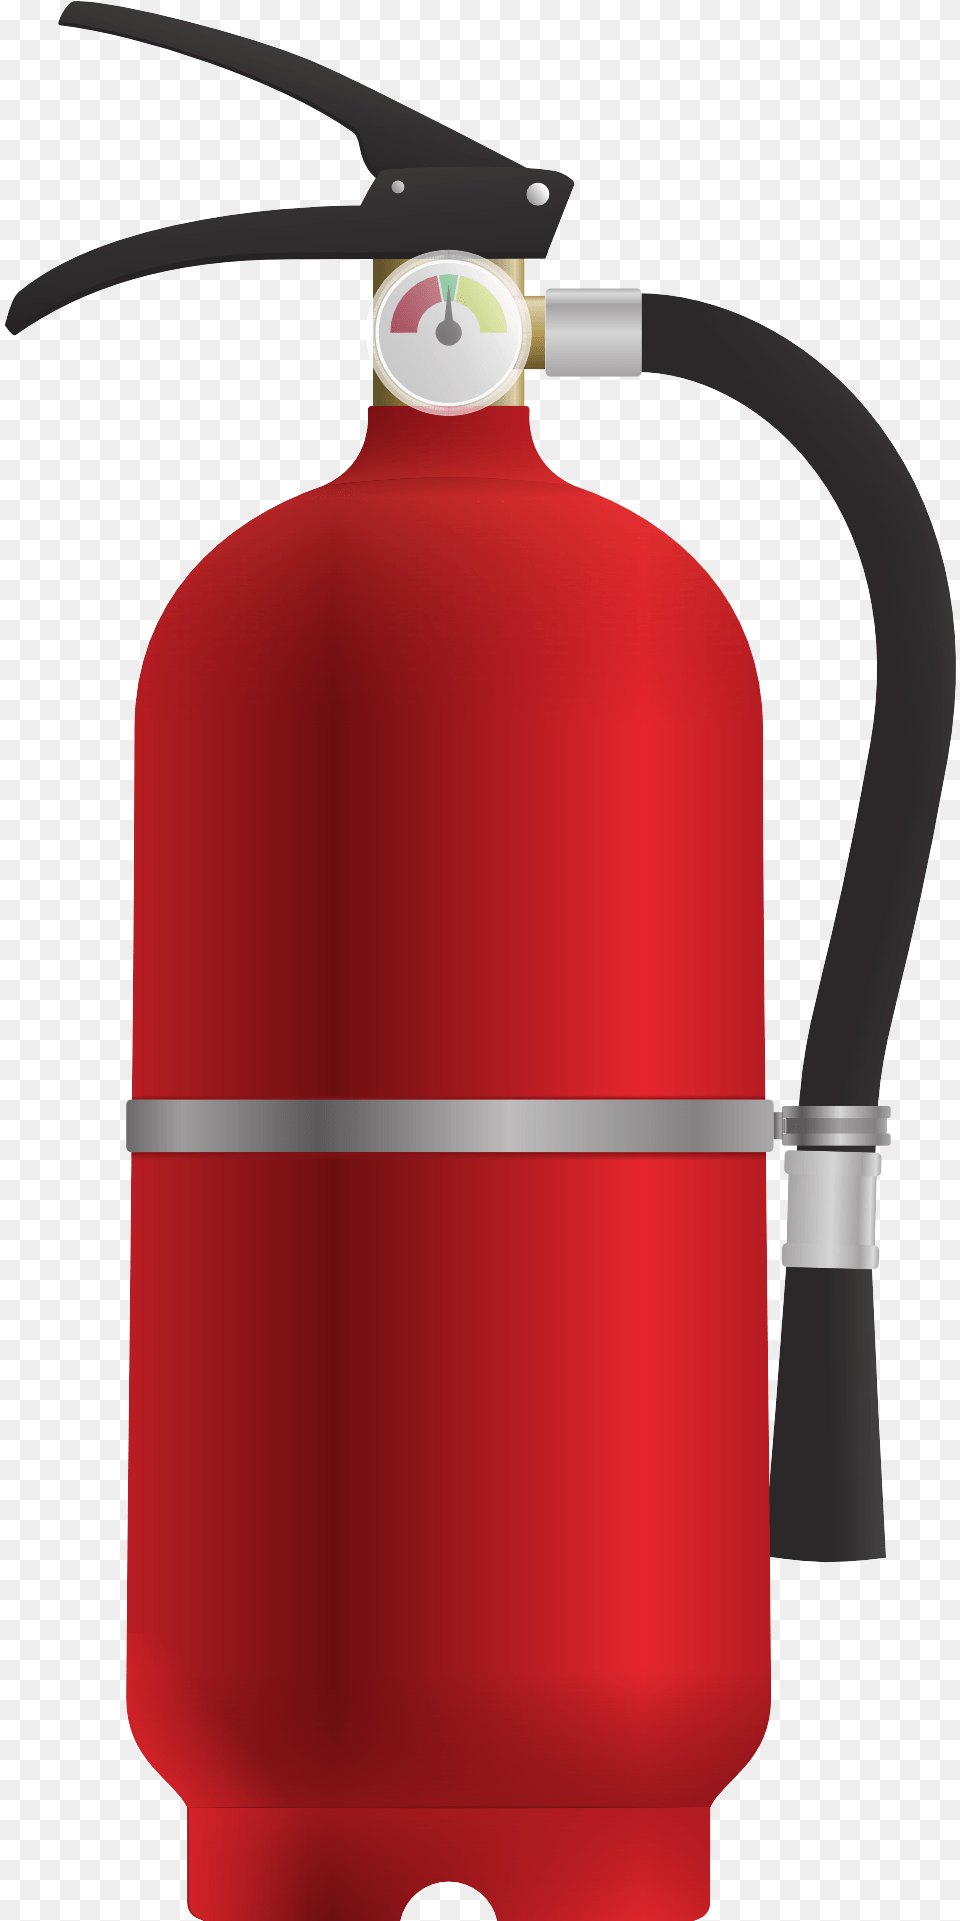 Fire Extinguisher Vector Image Fire Extinguisher Vector, Cylinder, Smoke Pipe Free Transparent Png